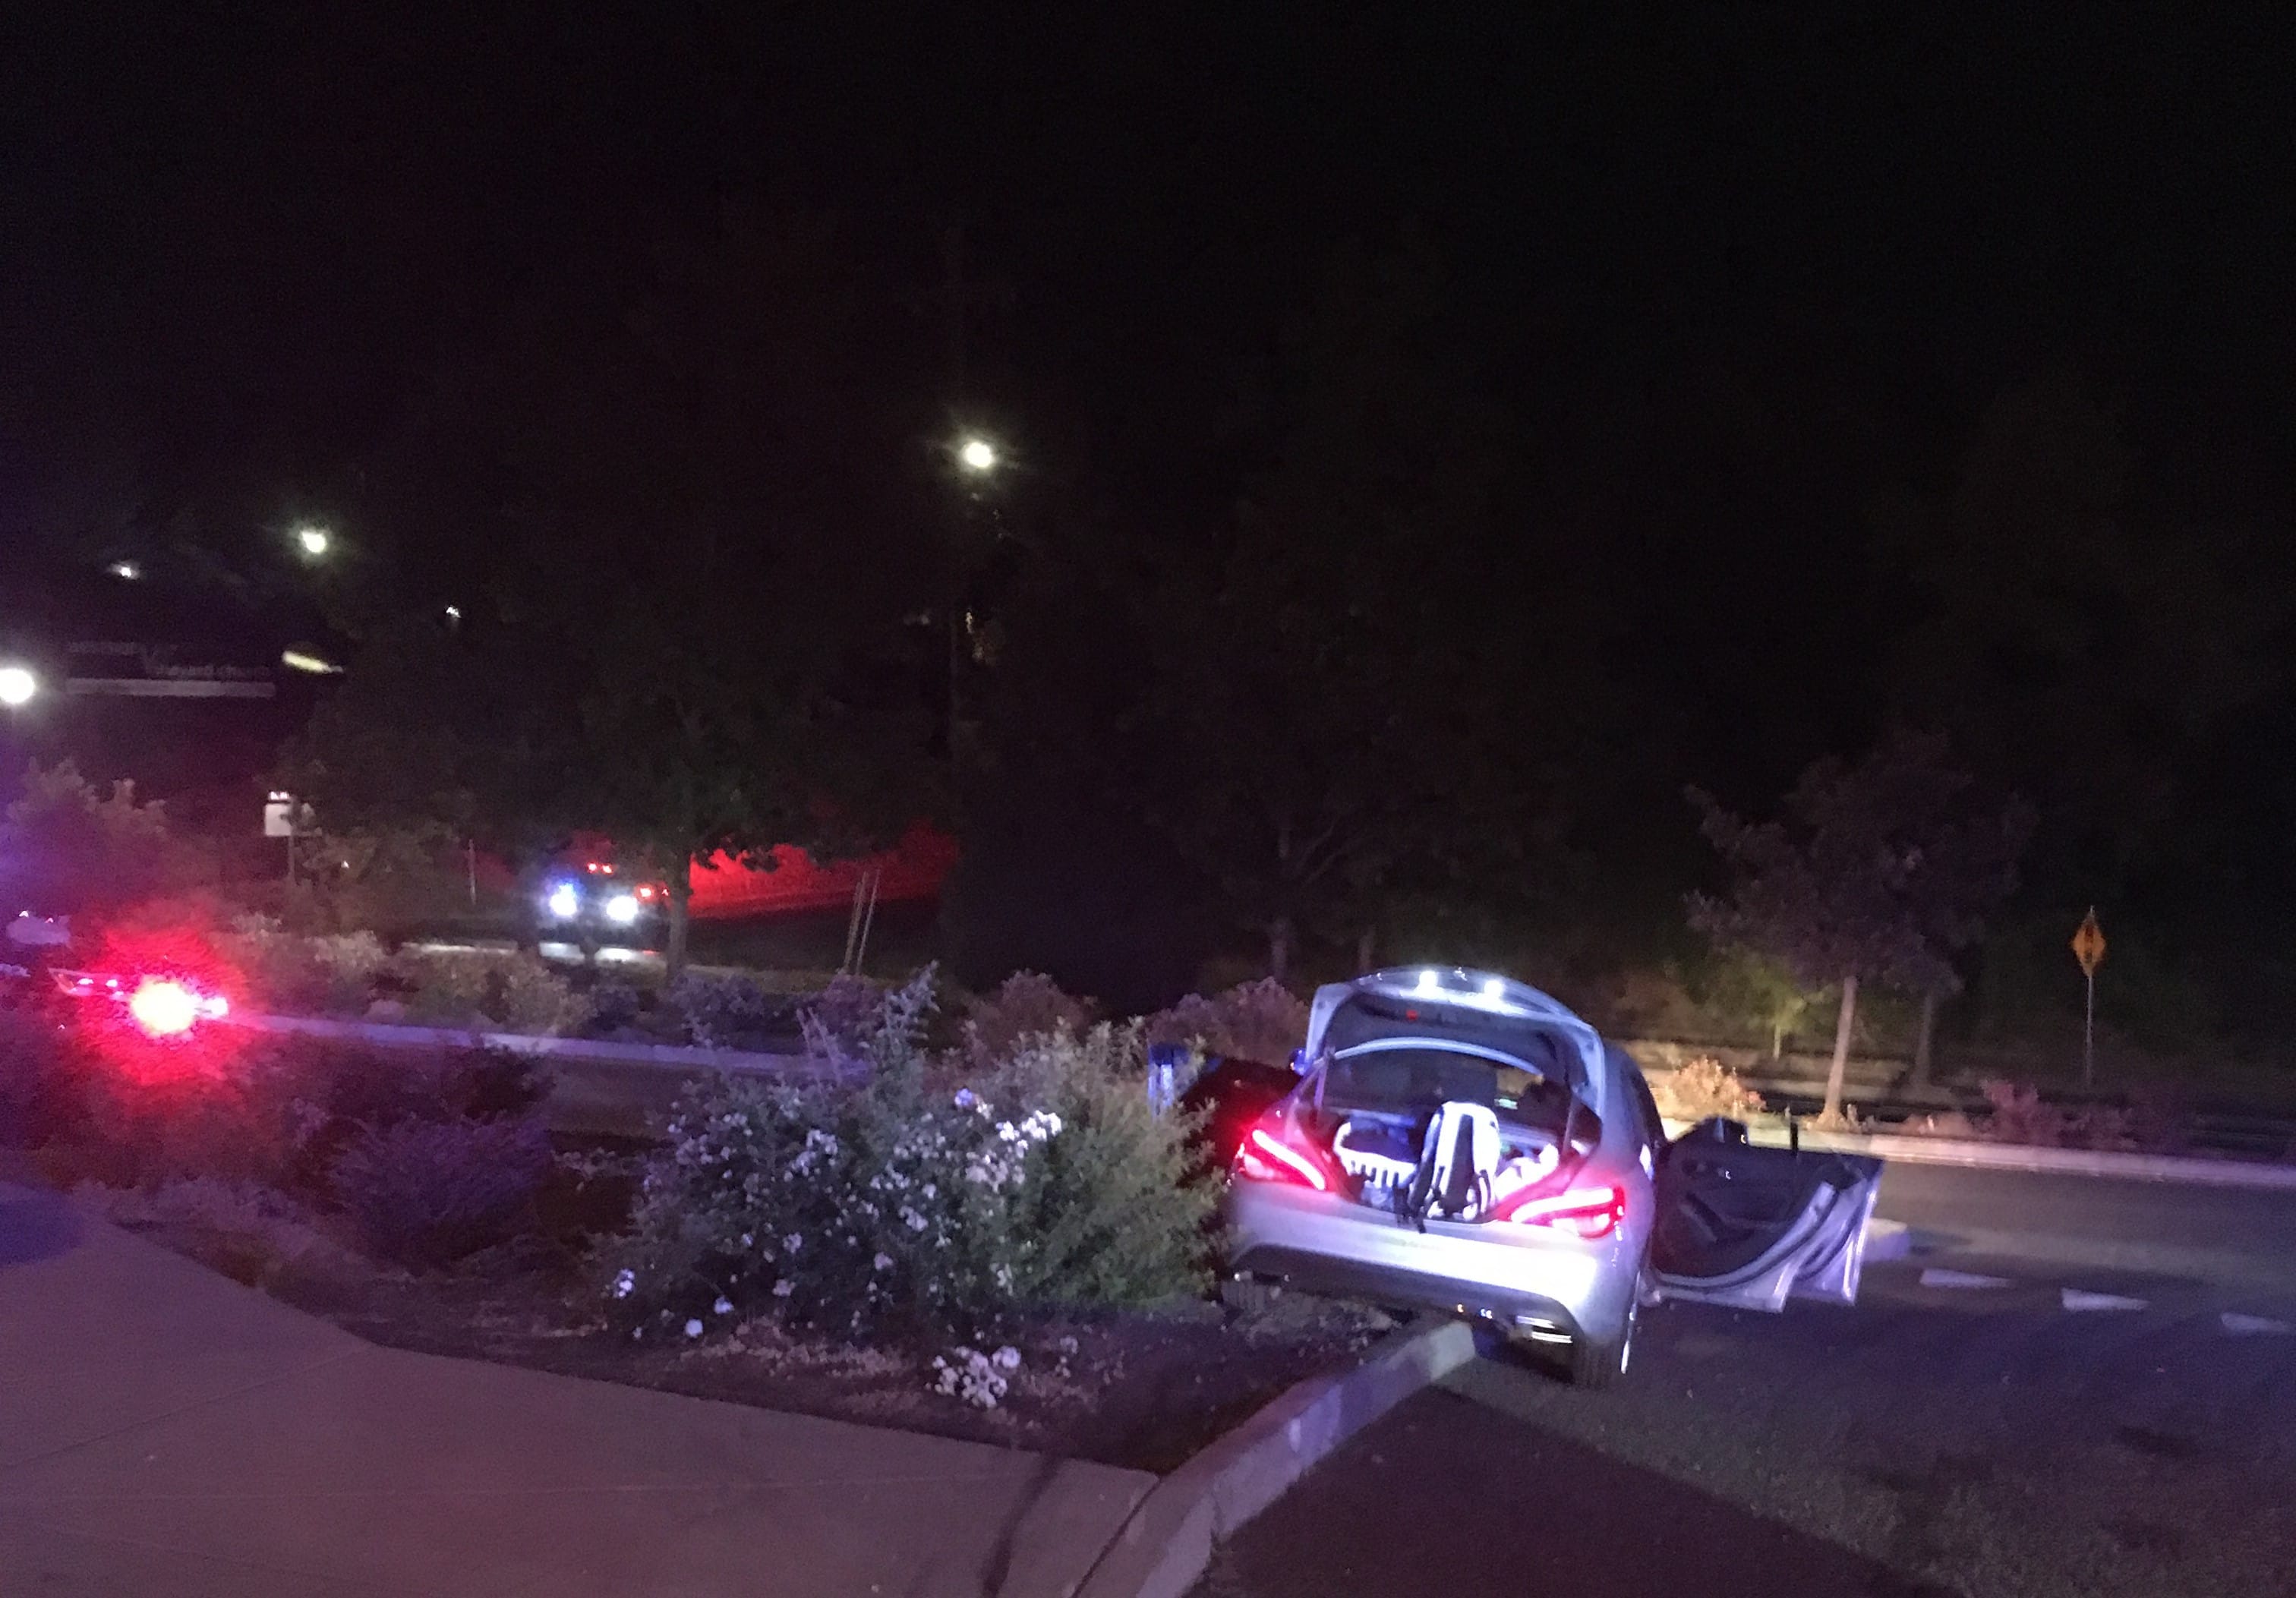 Two Vancouver women were arrested on suspicion of various charges following a police chase ending in a crash in Beaverton, Ore. on Friday night.